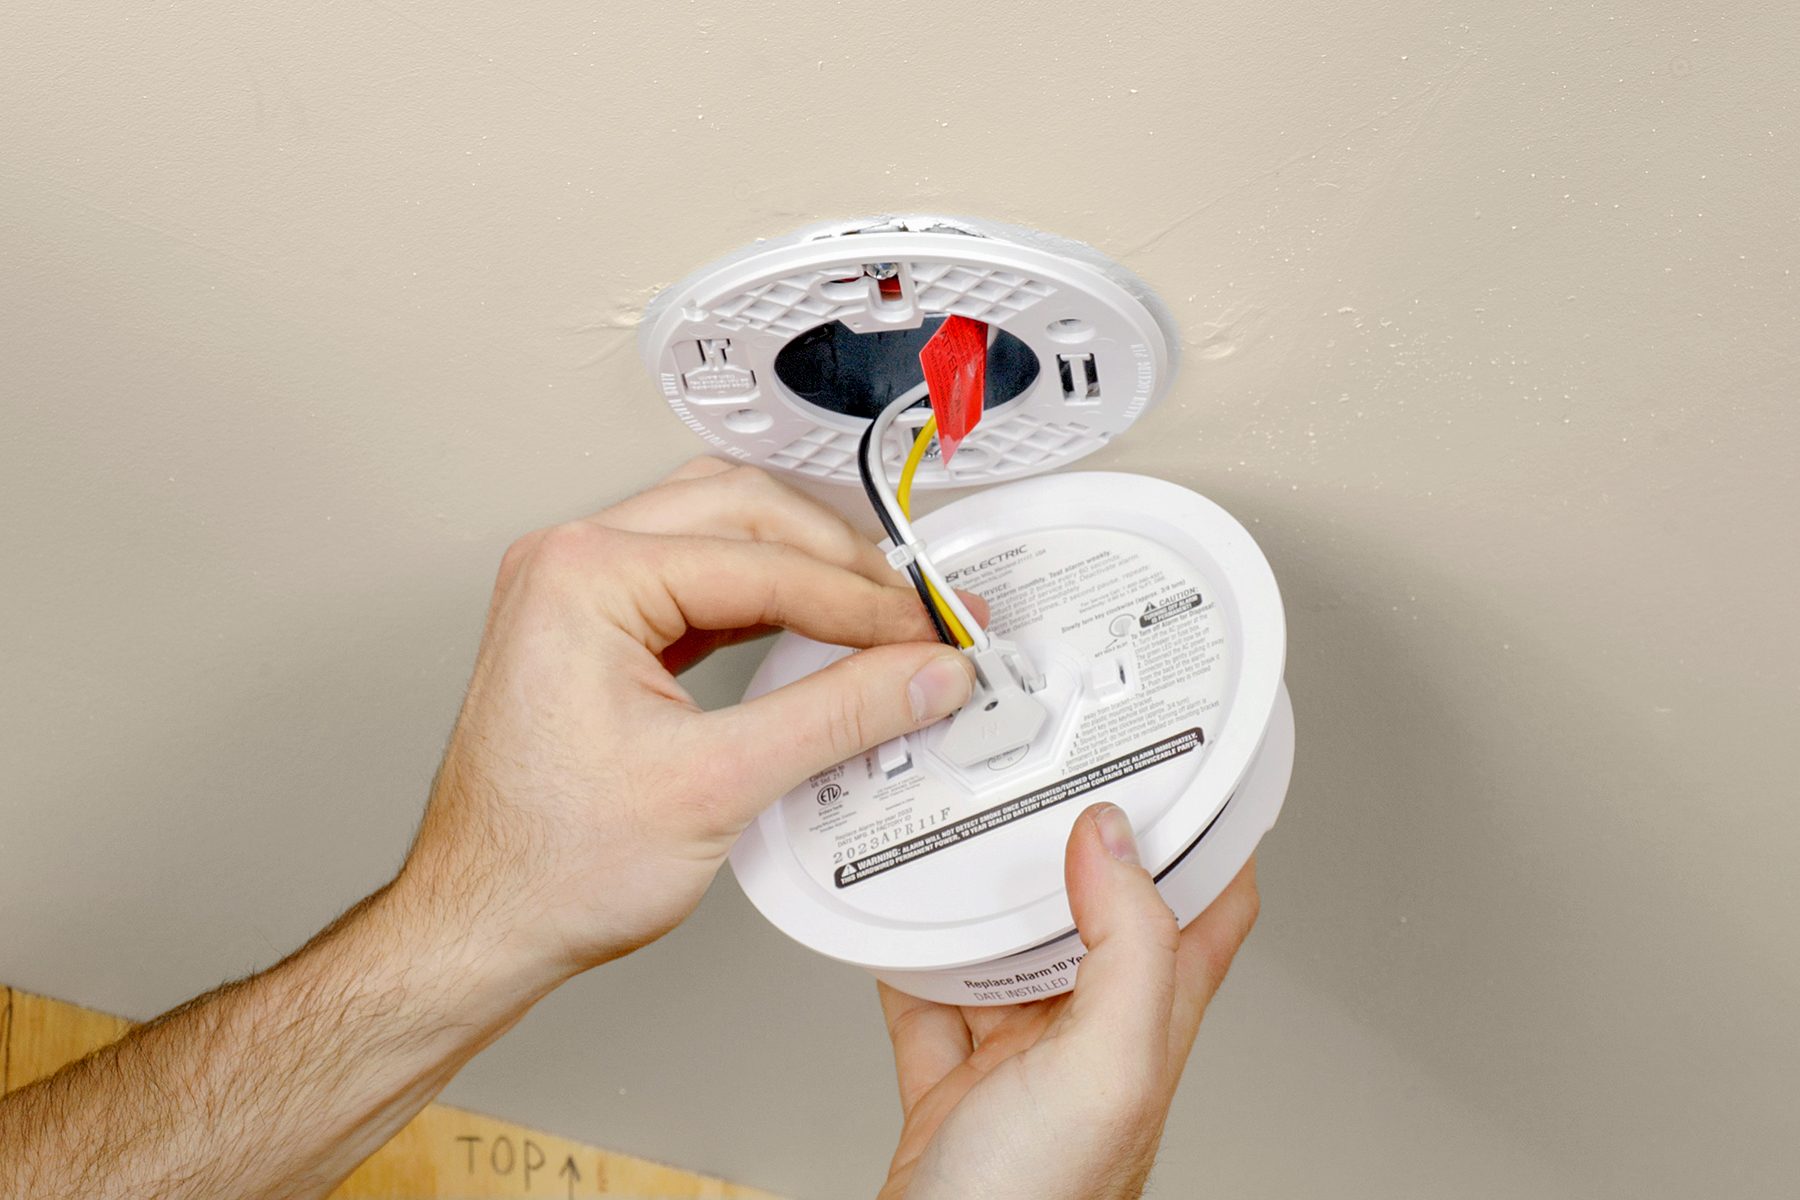 How to Install Hardwired Smoke Detectors